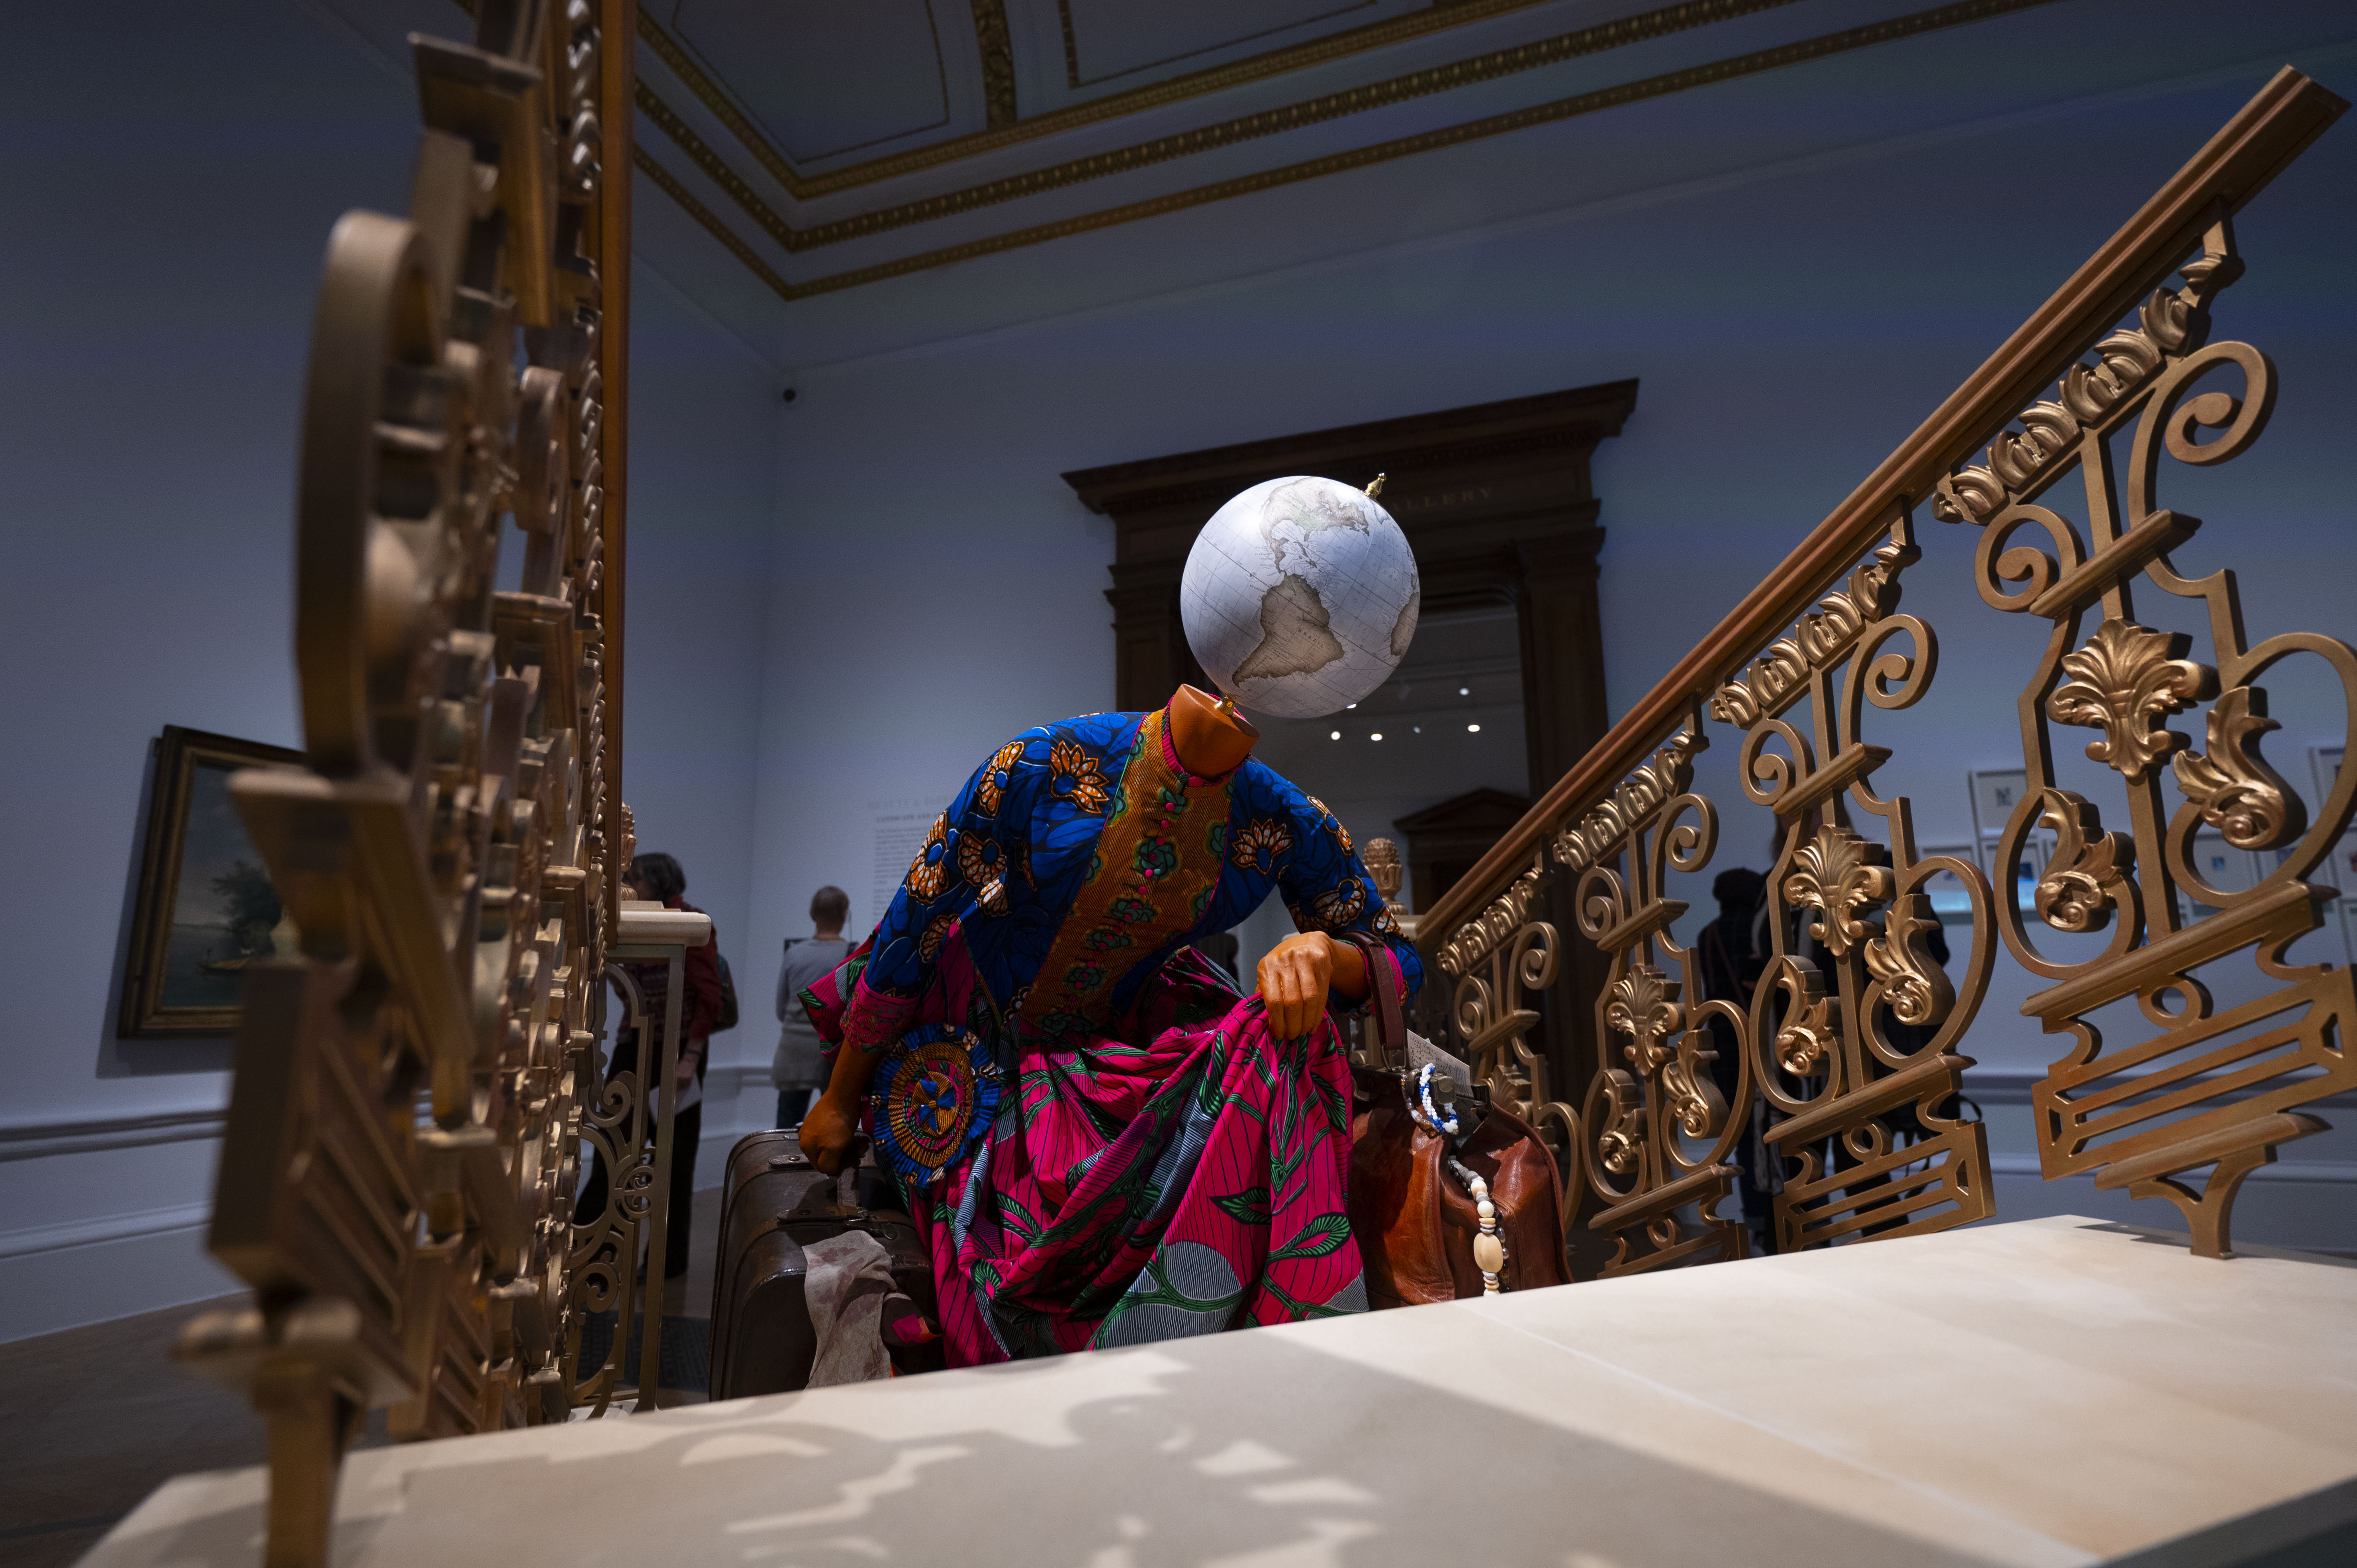 Royal Academy of Arts hosts &#039;Entangled Pasts, 1768-Now: Art, Colonialism and Change&#039; exhibit